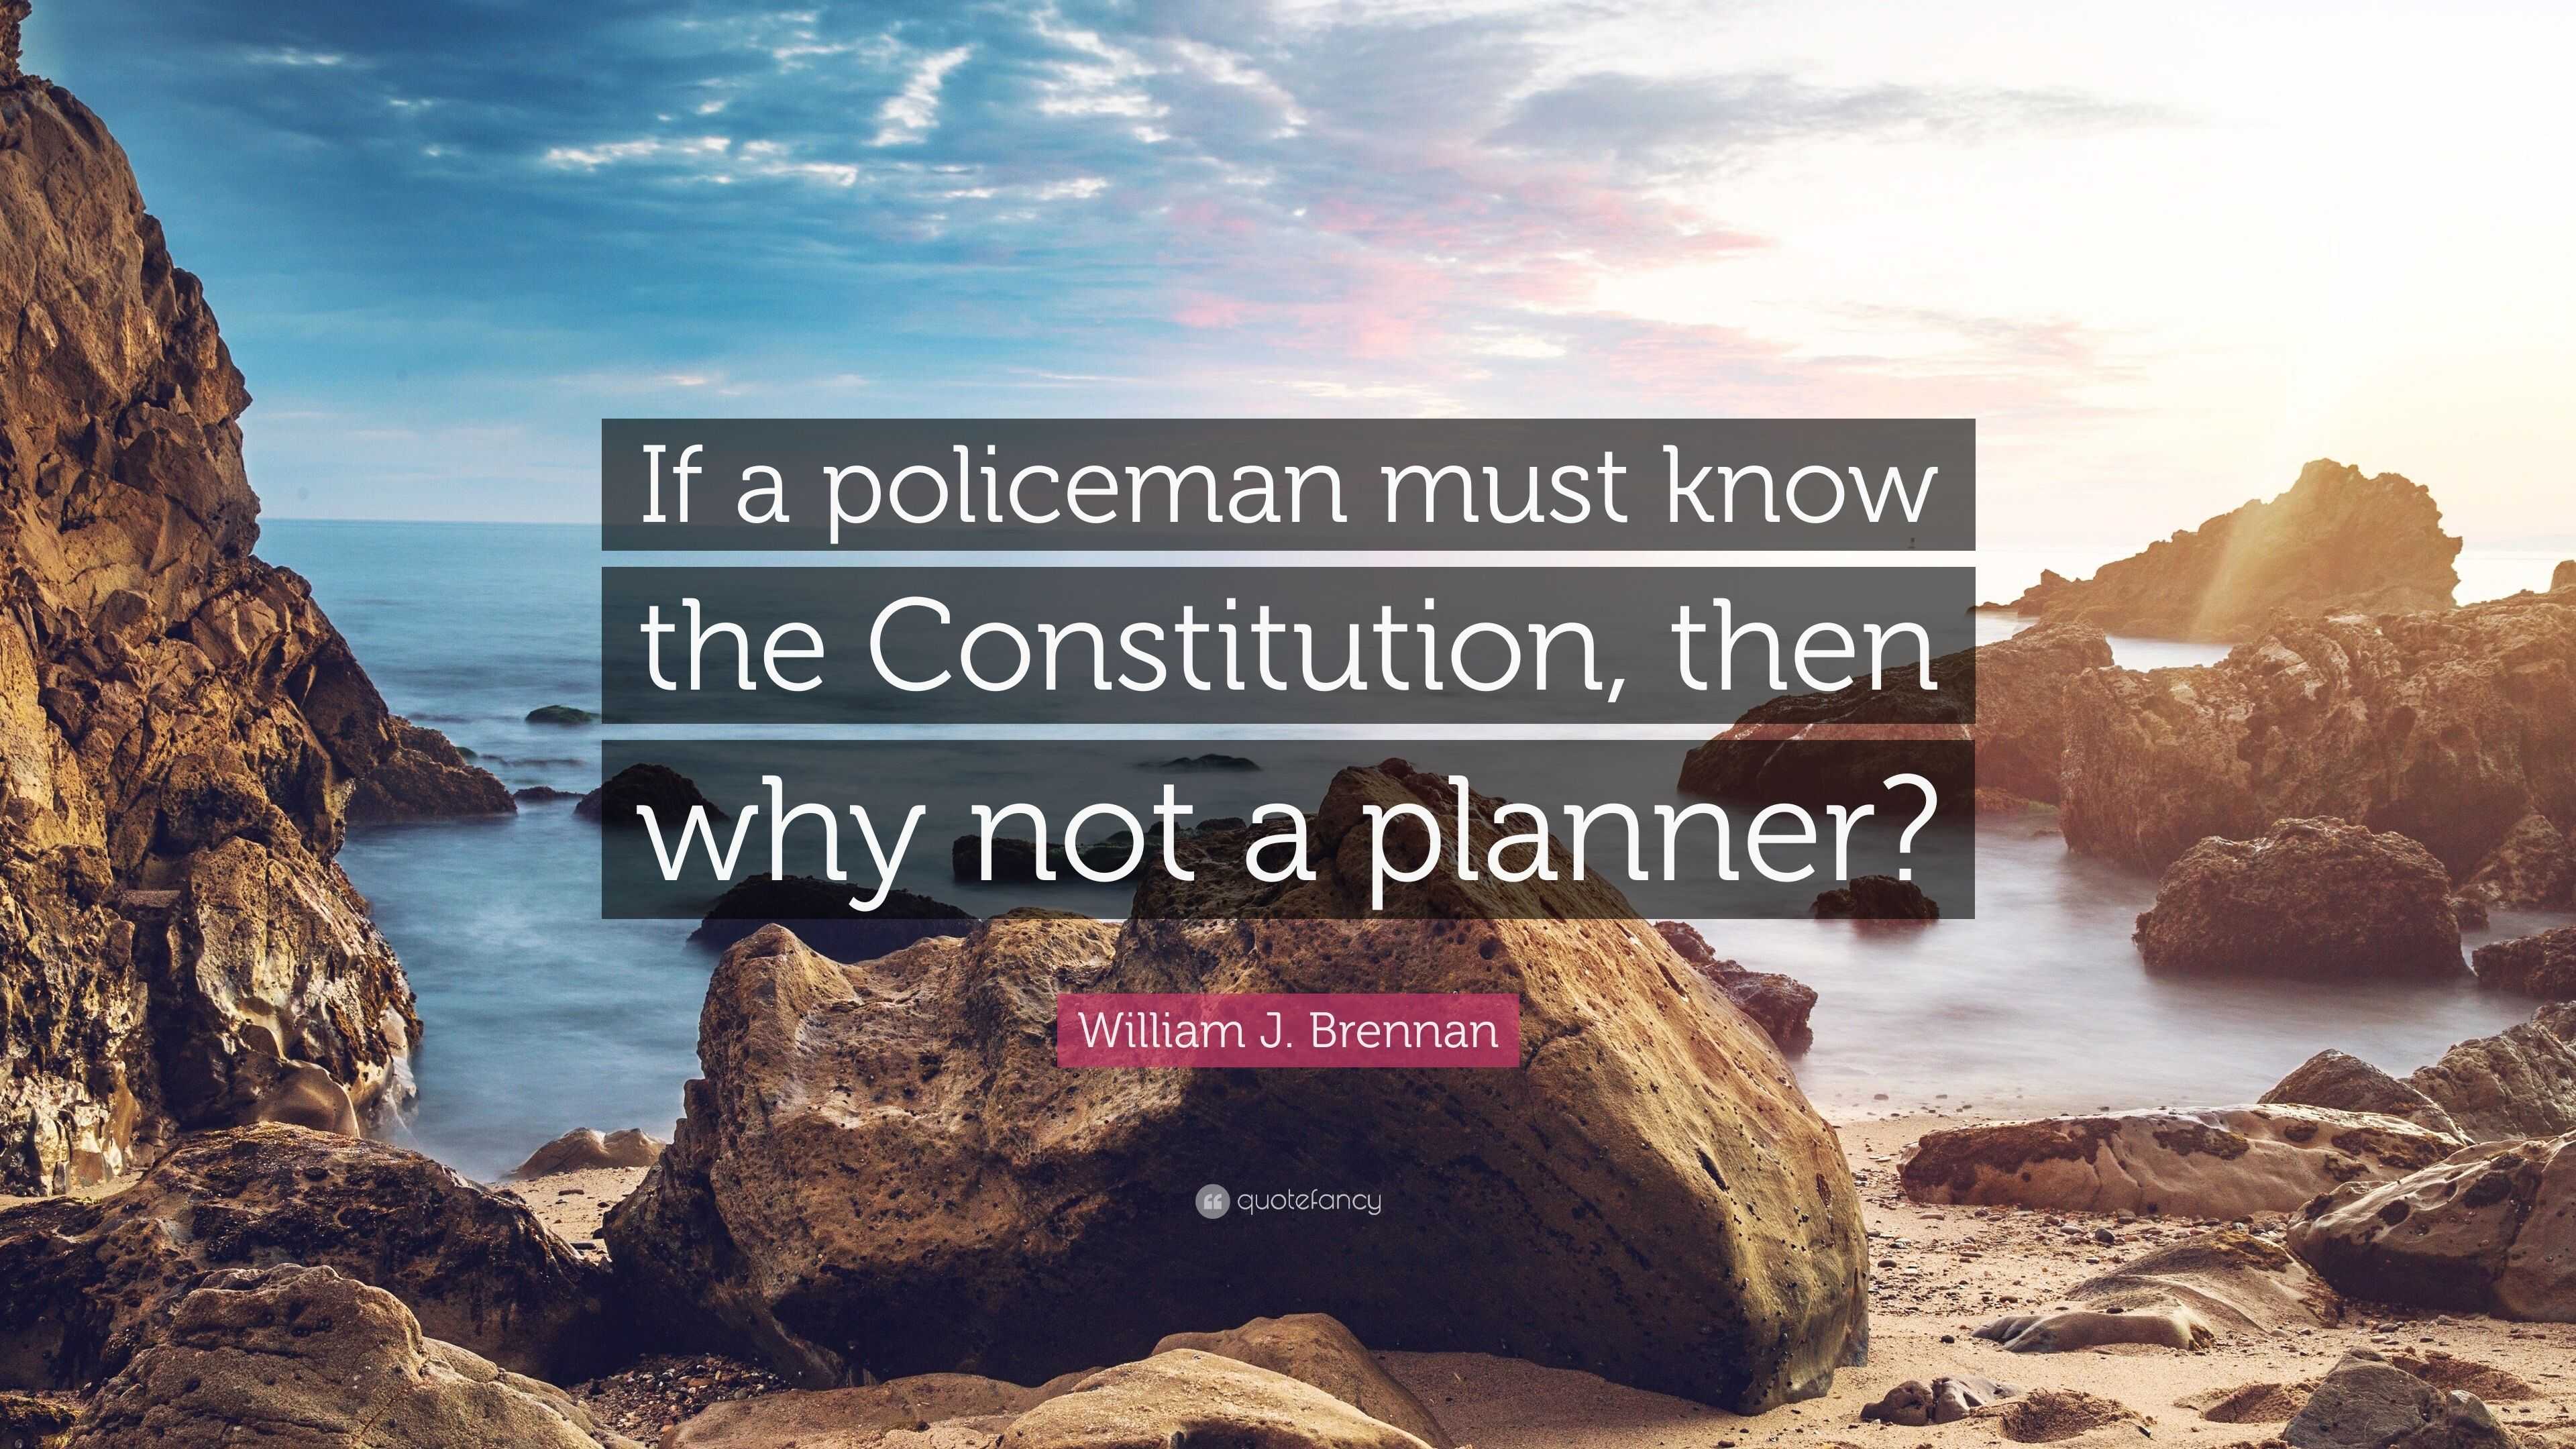 William J Brennan Quote “if A Policeman Must Know The Constitution Then Why Not A Planner” 8464